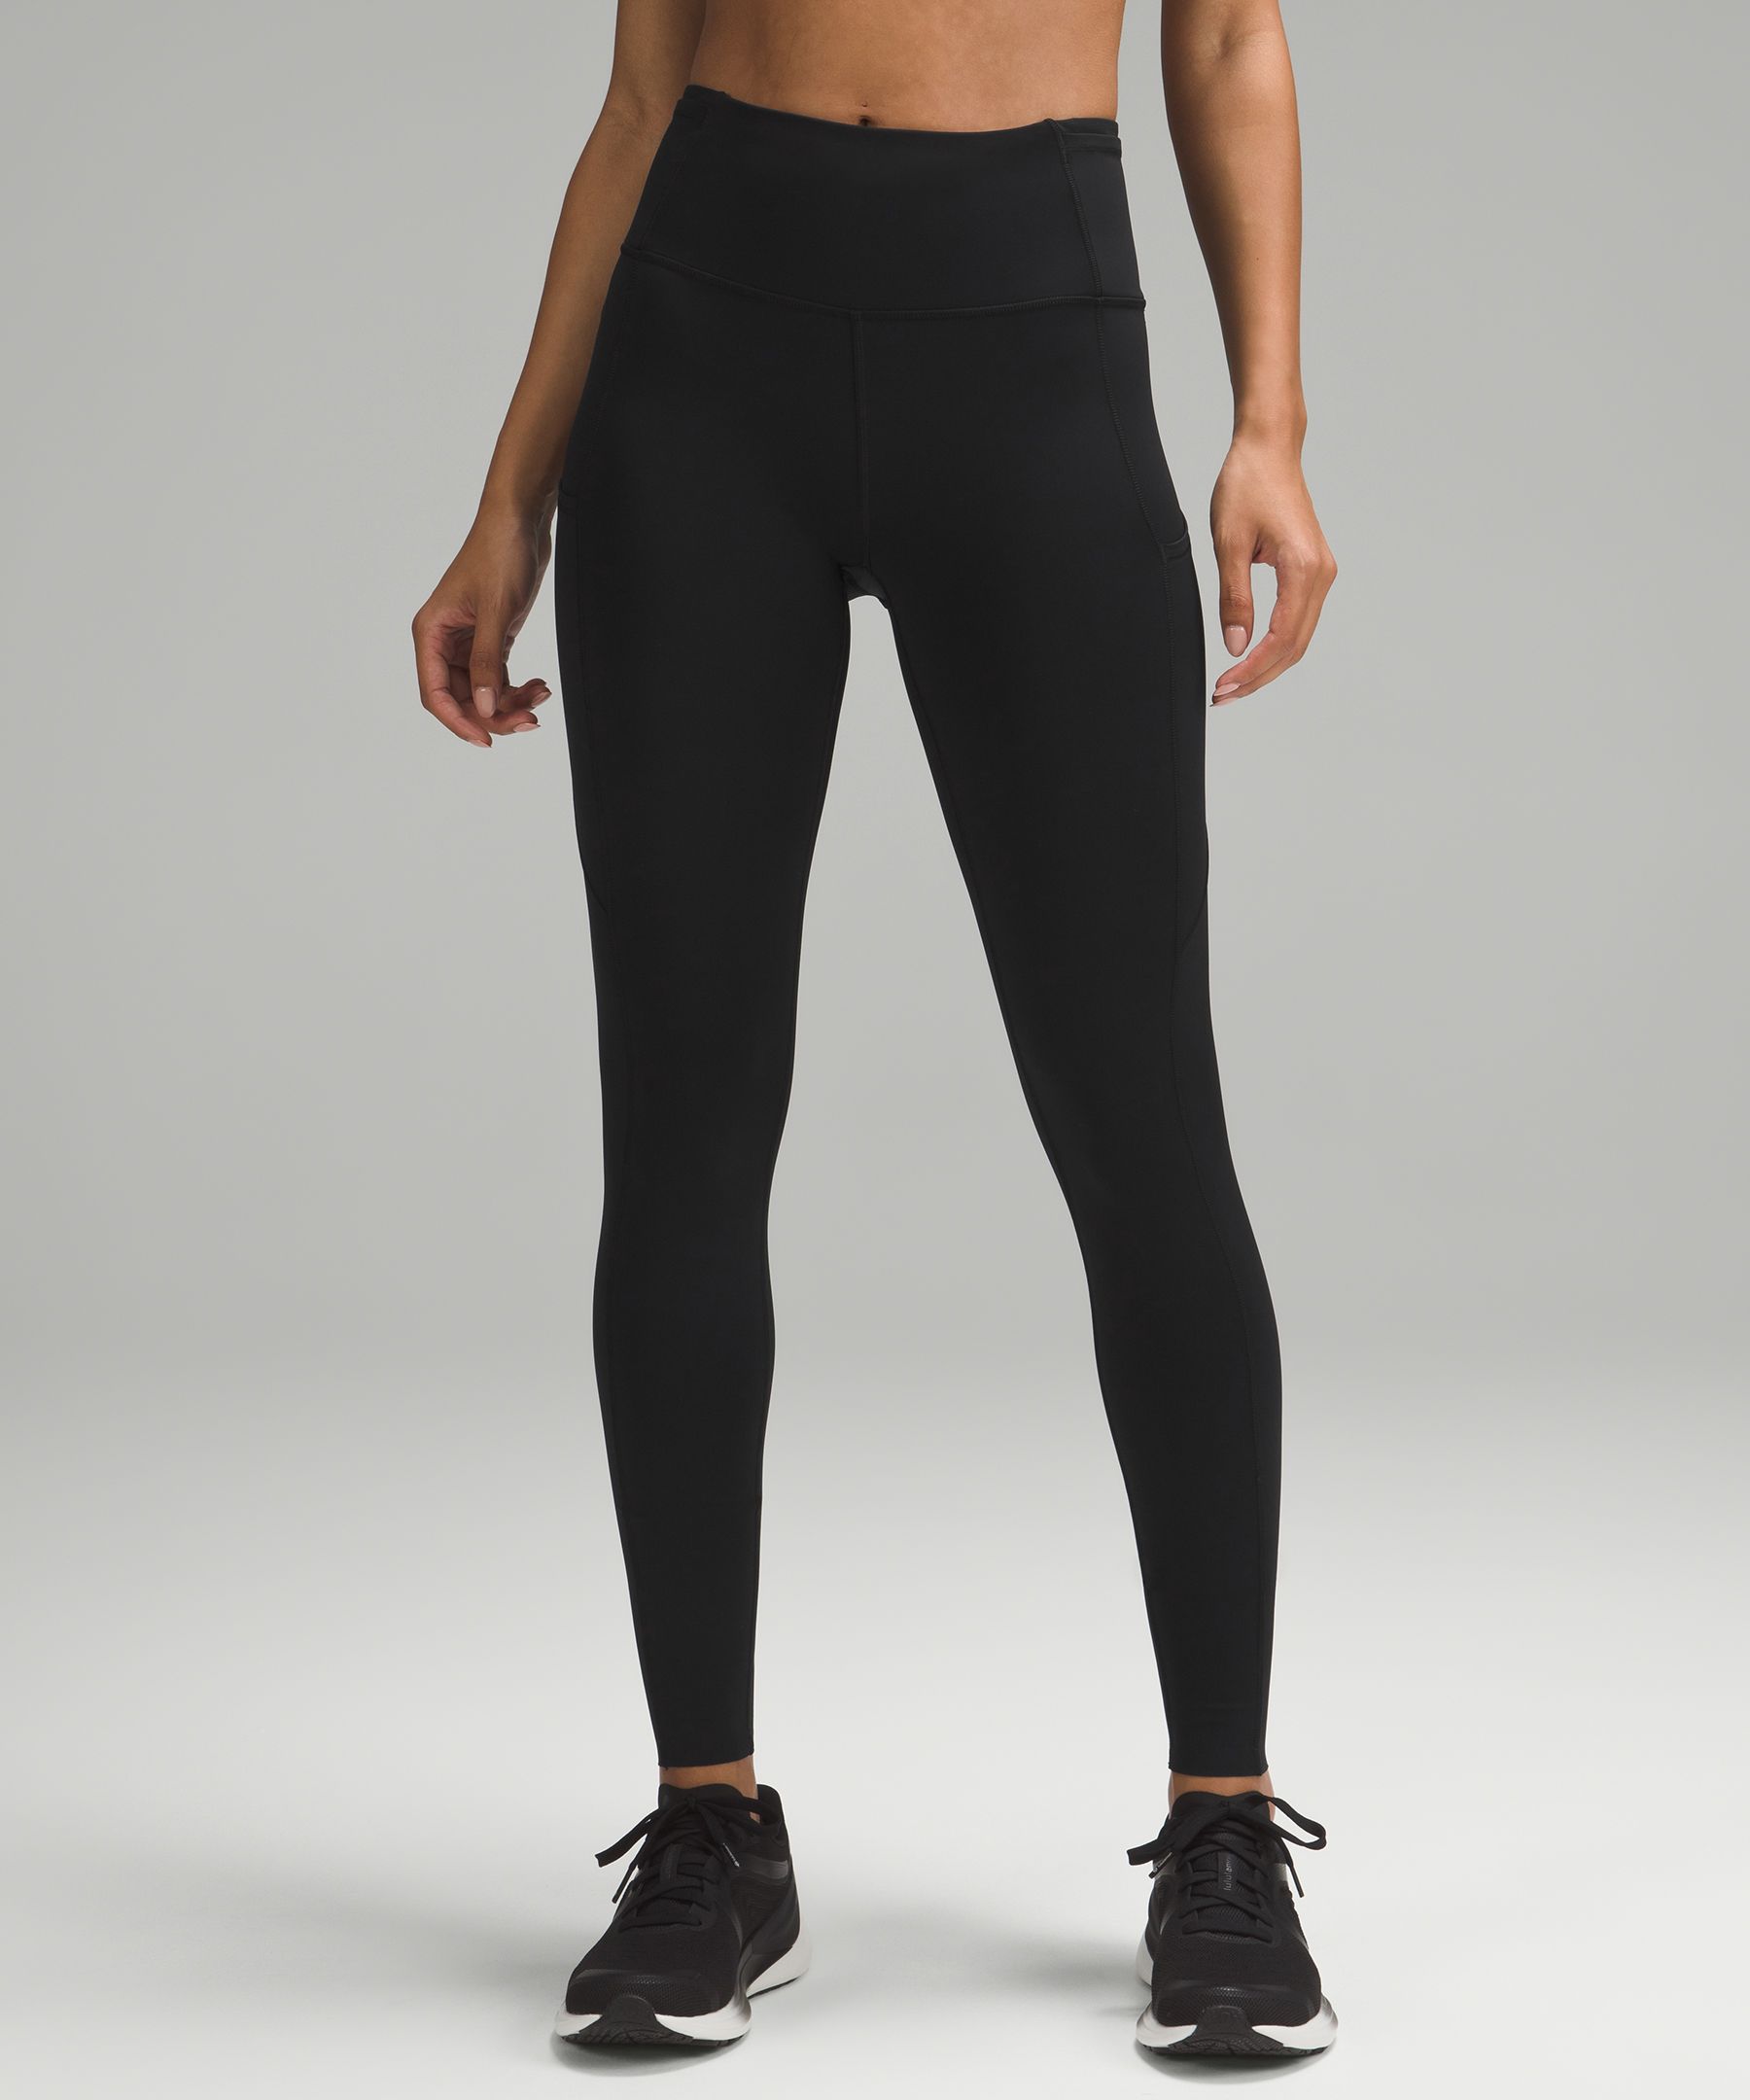 fast and free tights lululemon